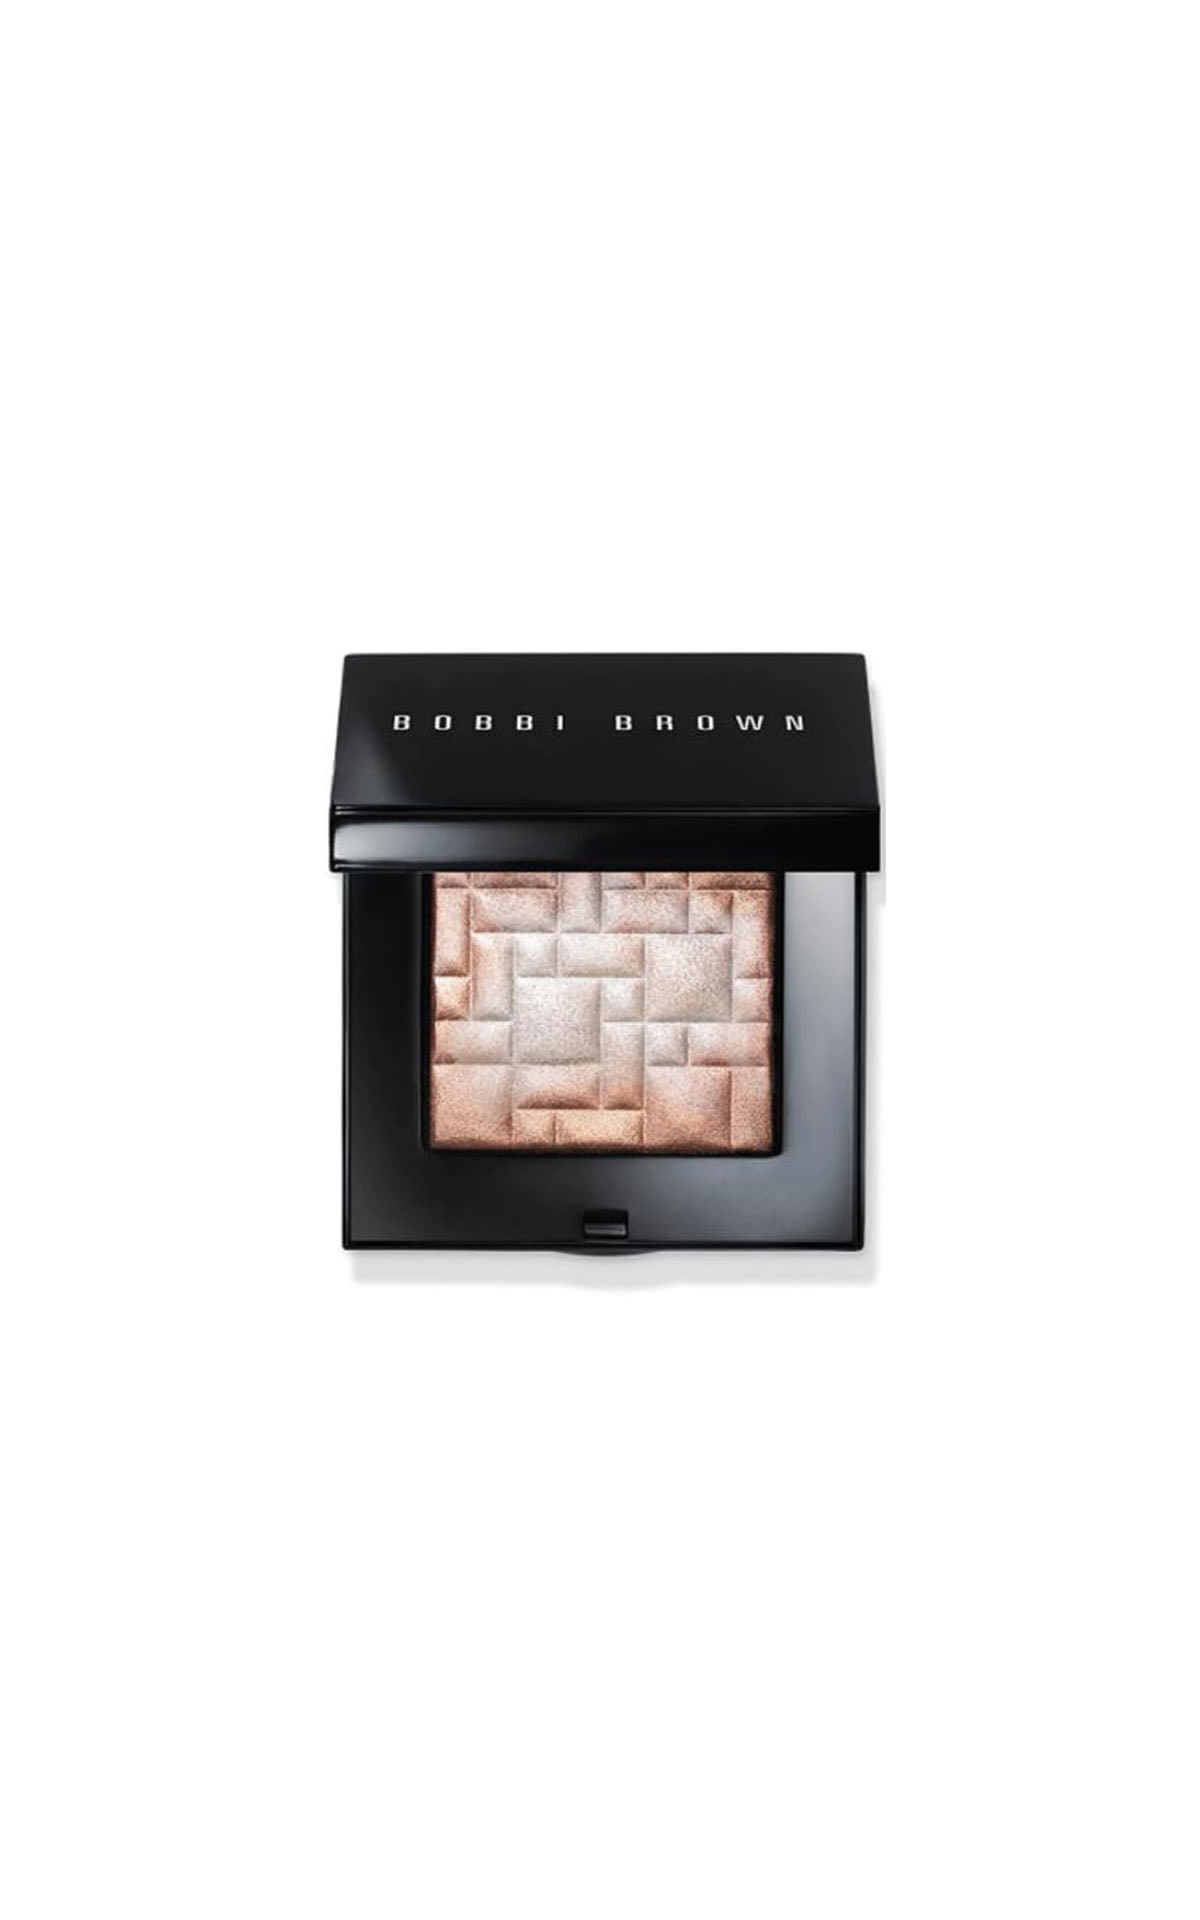 BV_Entity_image_product_The Cosmetics Company Store_Bobbi brown highlighting powder duo shade pink glow